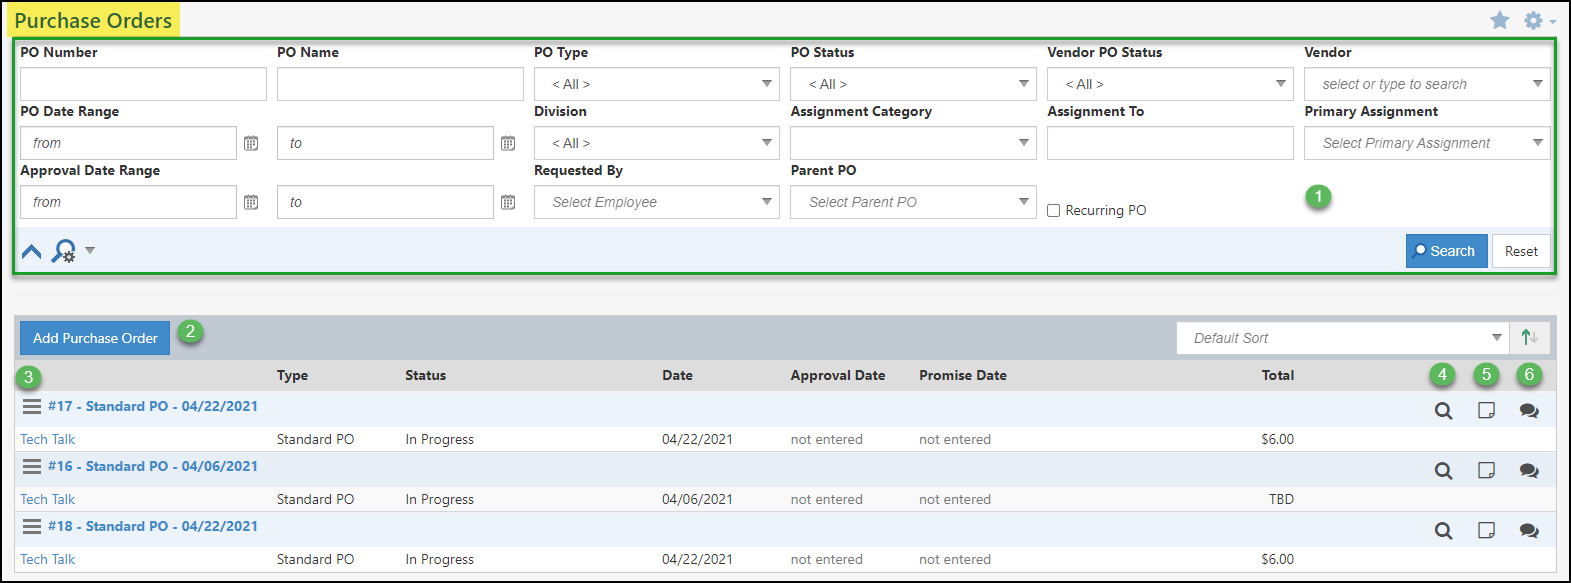 Purchase Order List with Search filters, add PO button, hamburger menu, view log, note log and discussions button